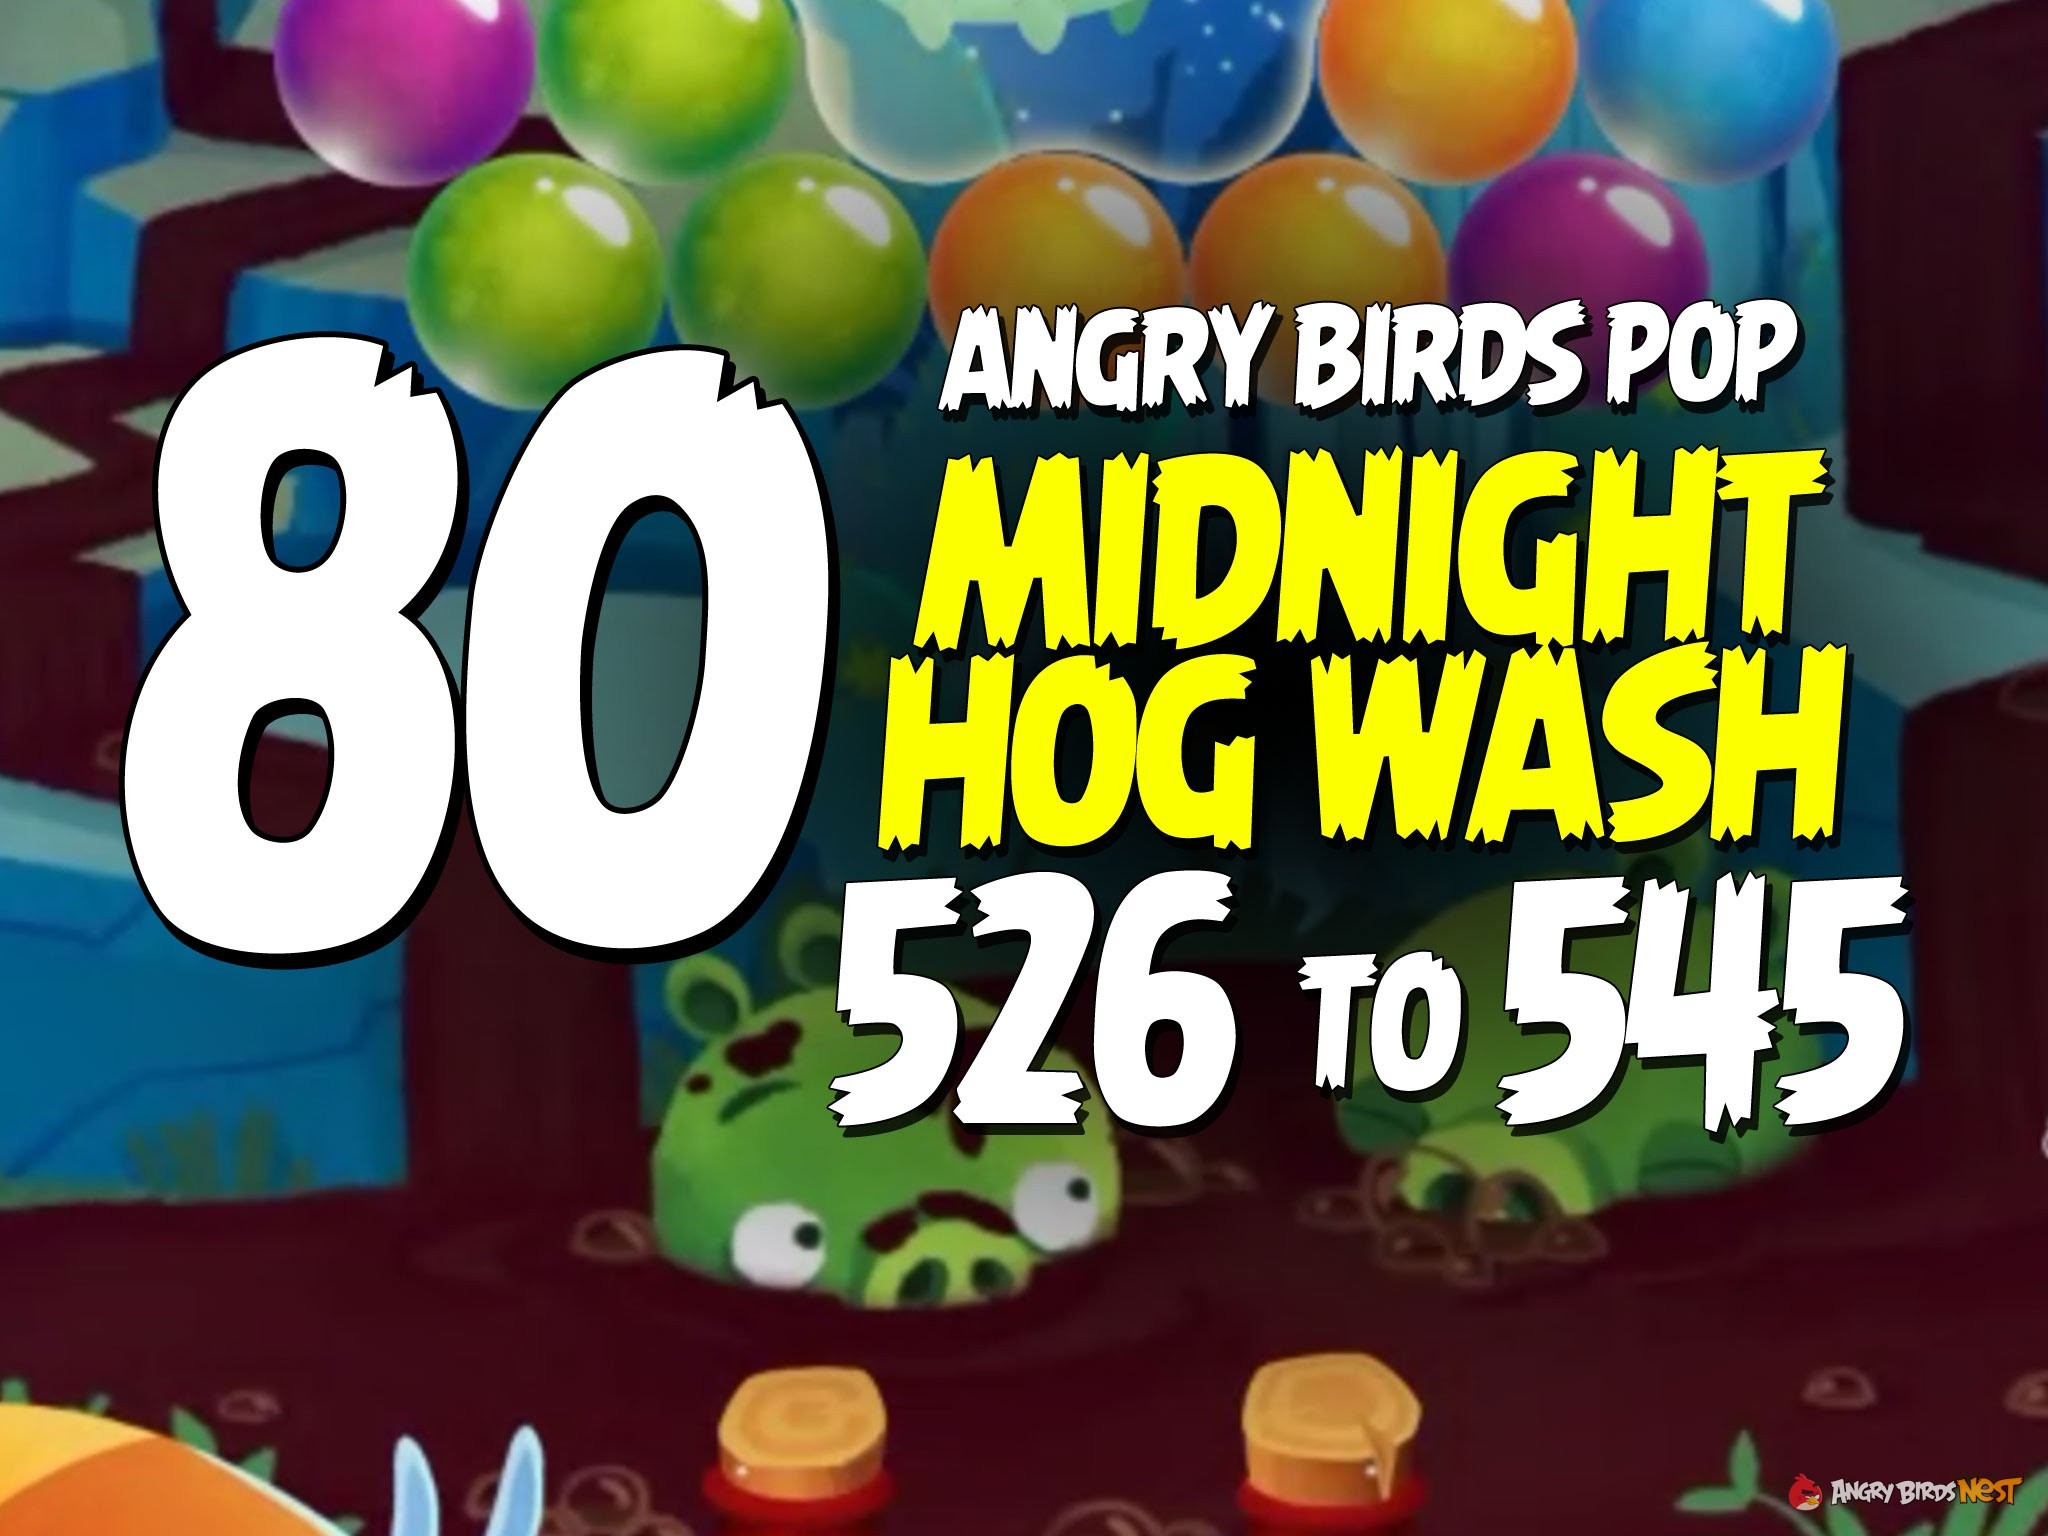 Angry Birds Pop Part 80 - Levels 526 to 545 - Midnight Hog Wash